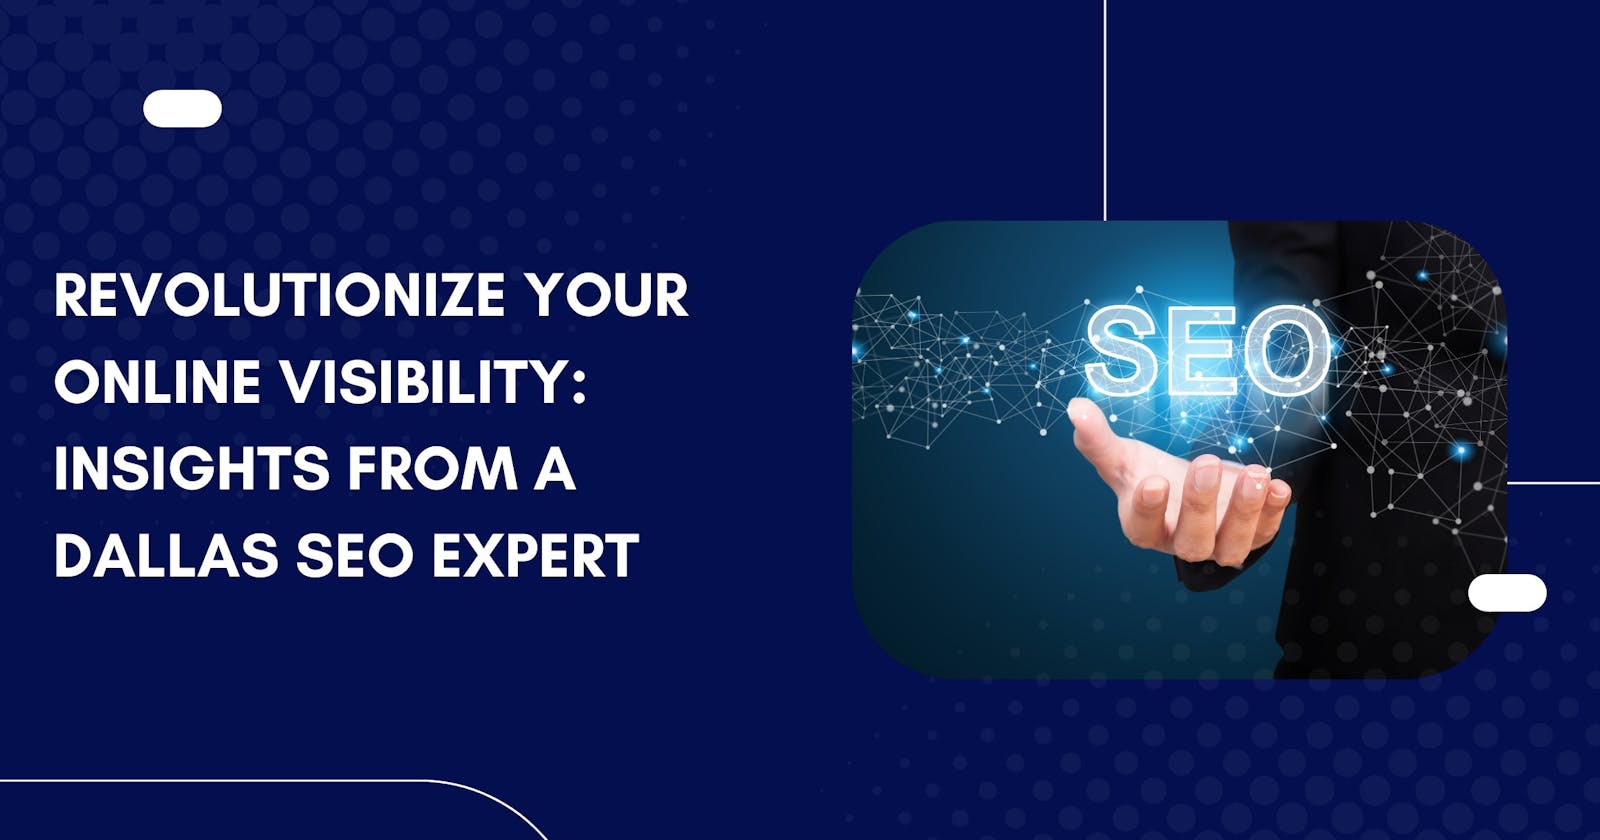 Revolutionize Your Online Visibility: Insights from a Dallas SEO Expert